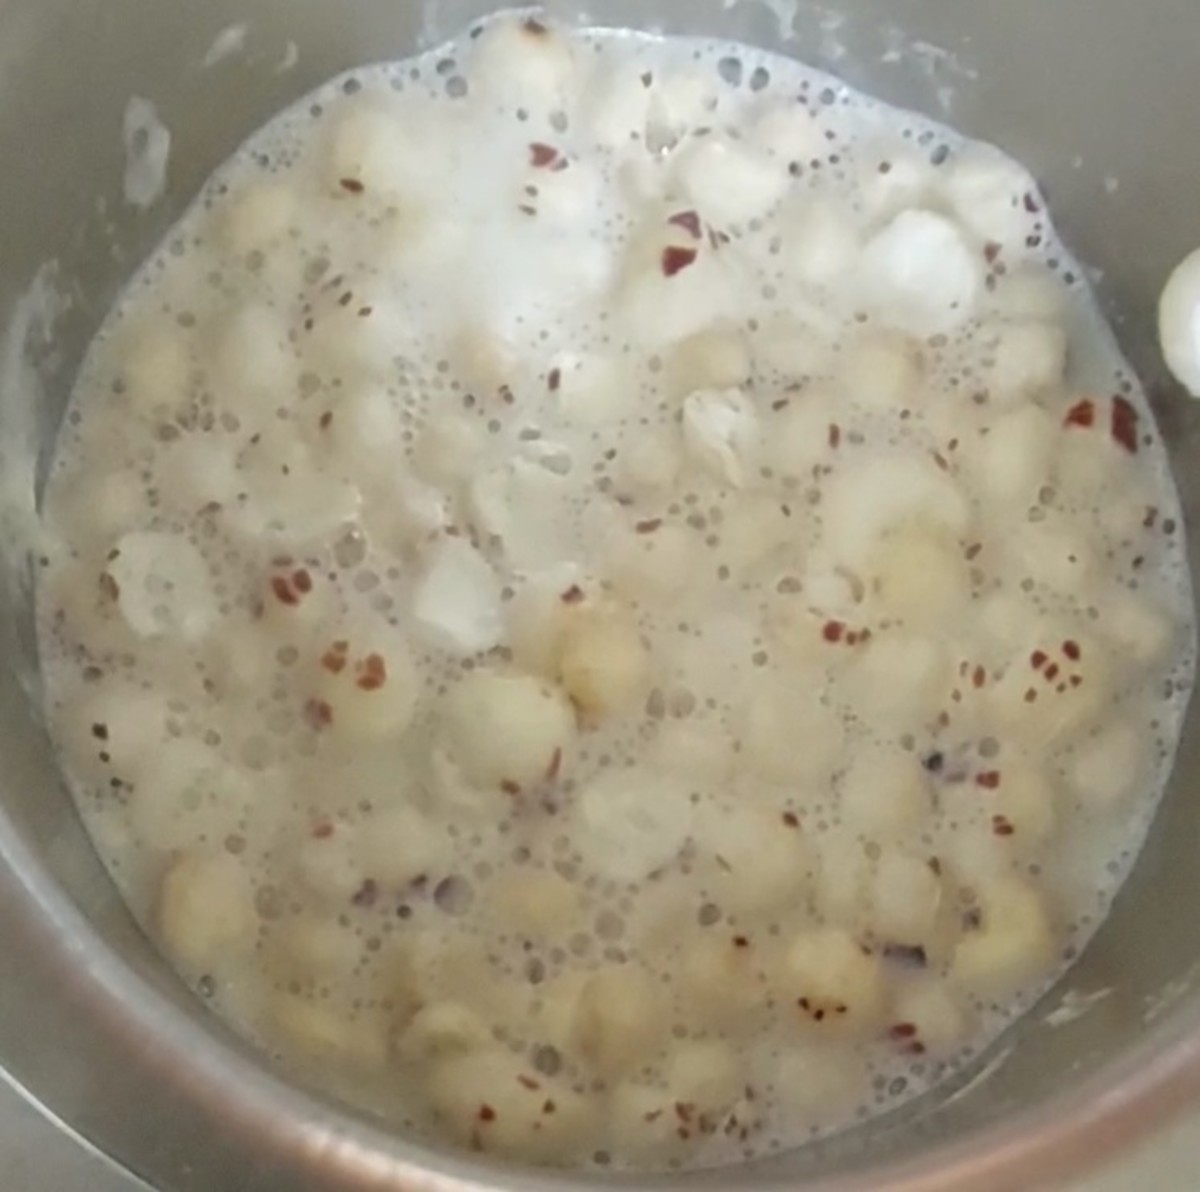 After the milk thickens, add chopped lotus seeds and mix well. Bring it back to a boil.